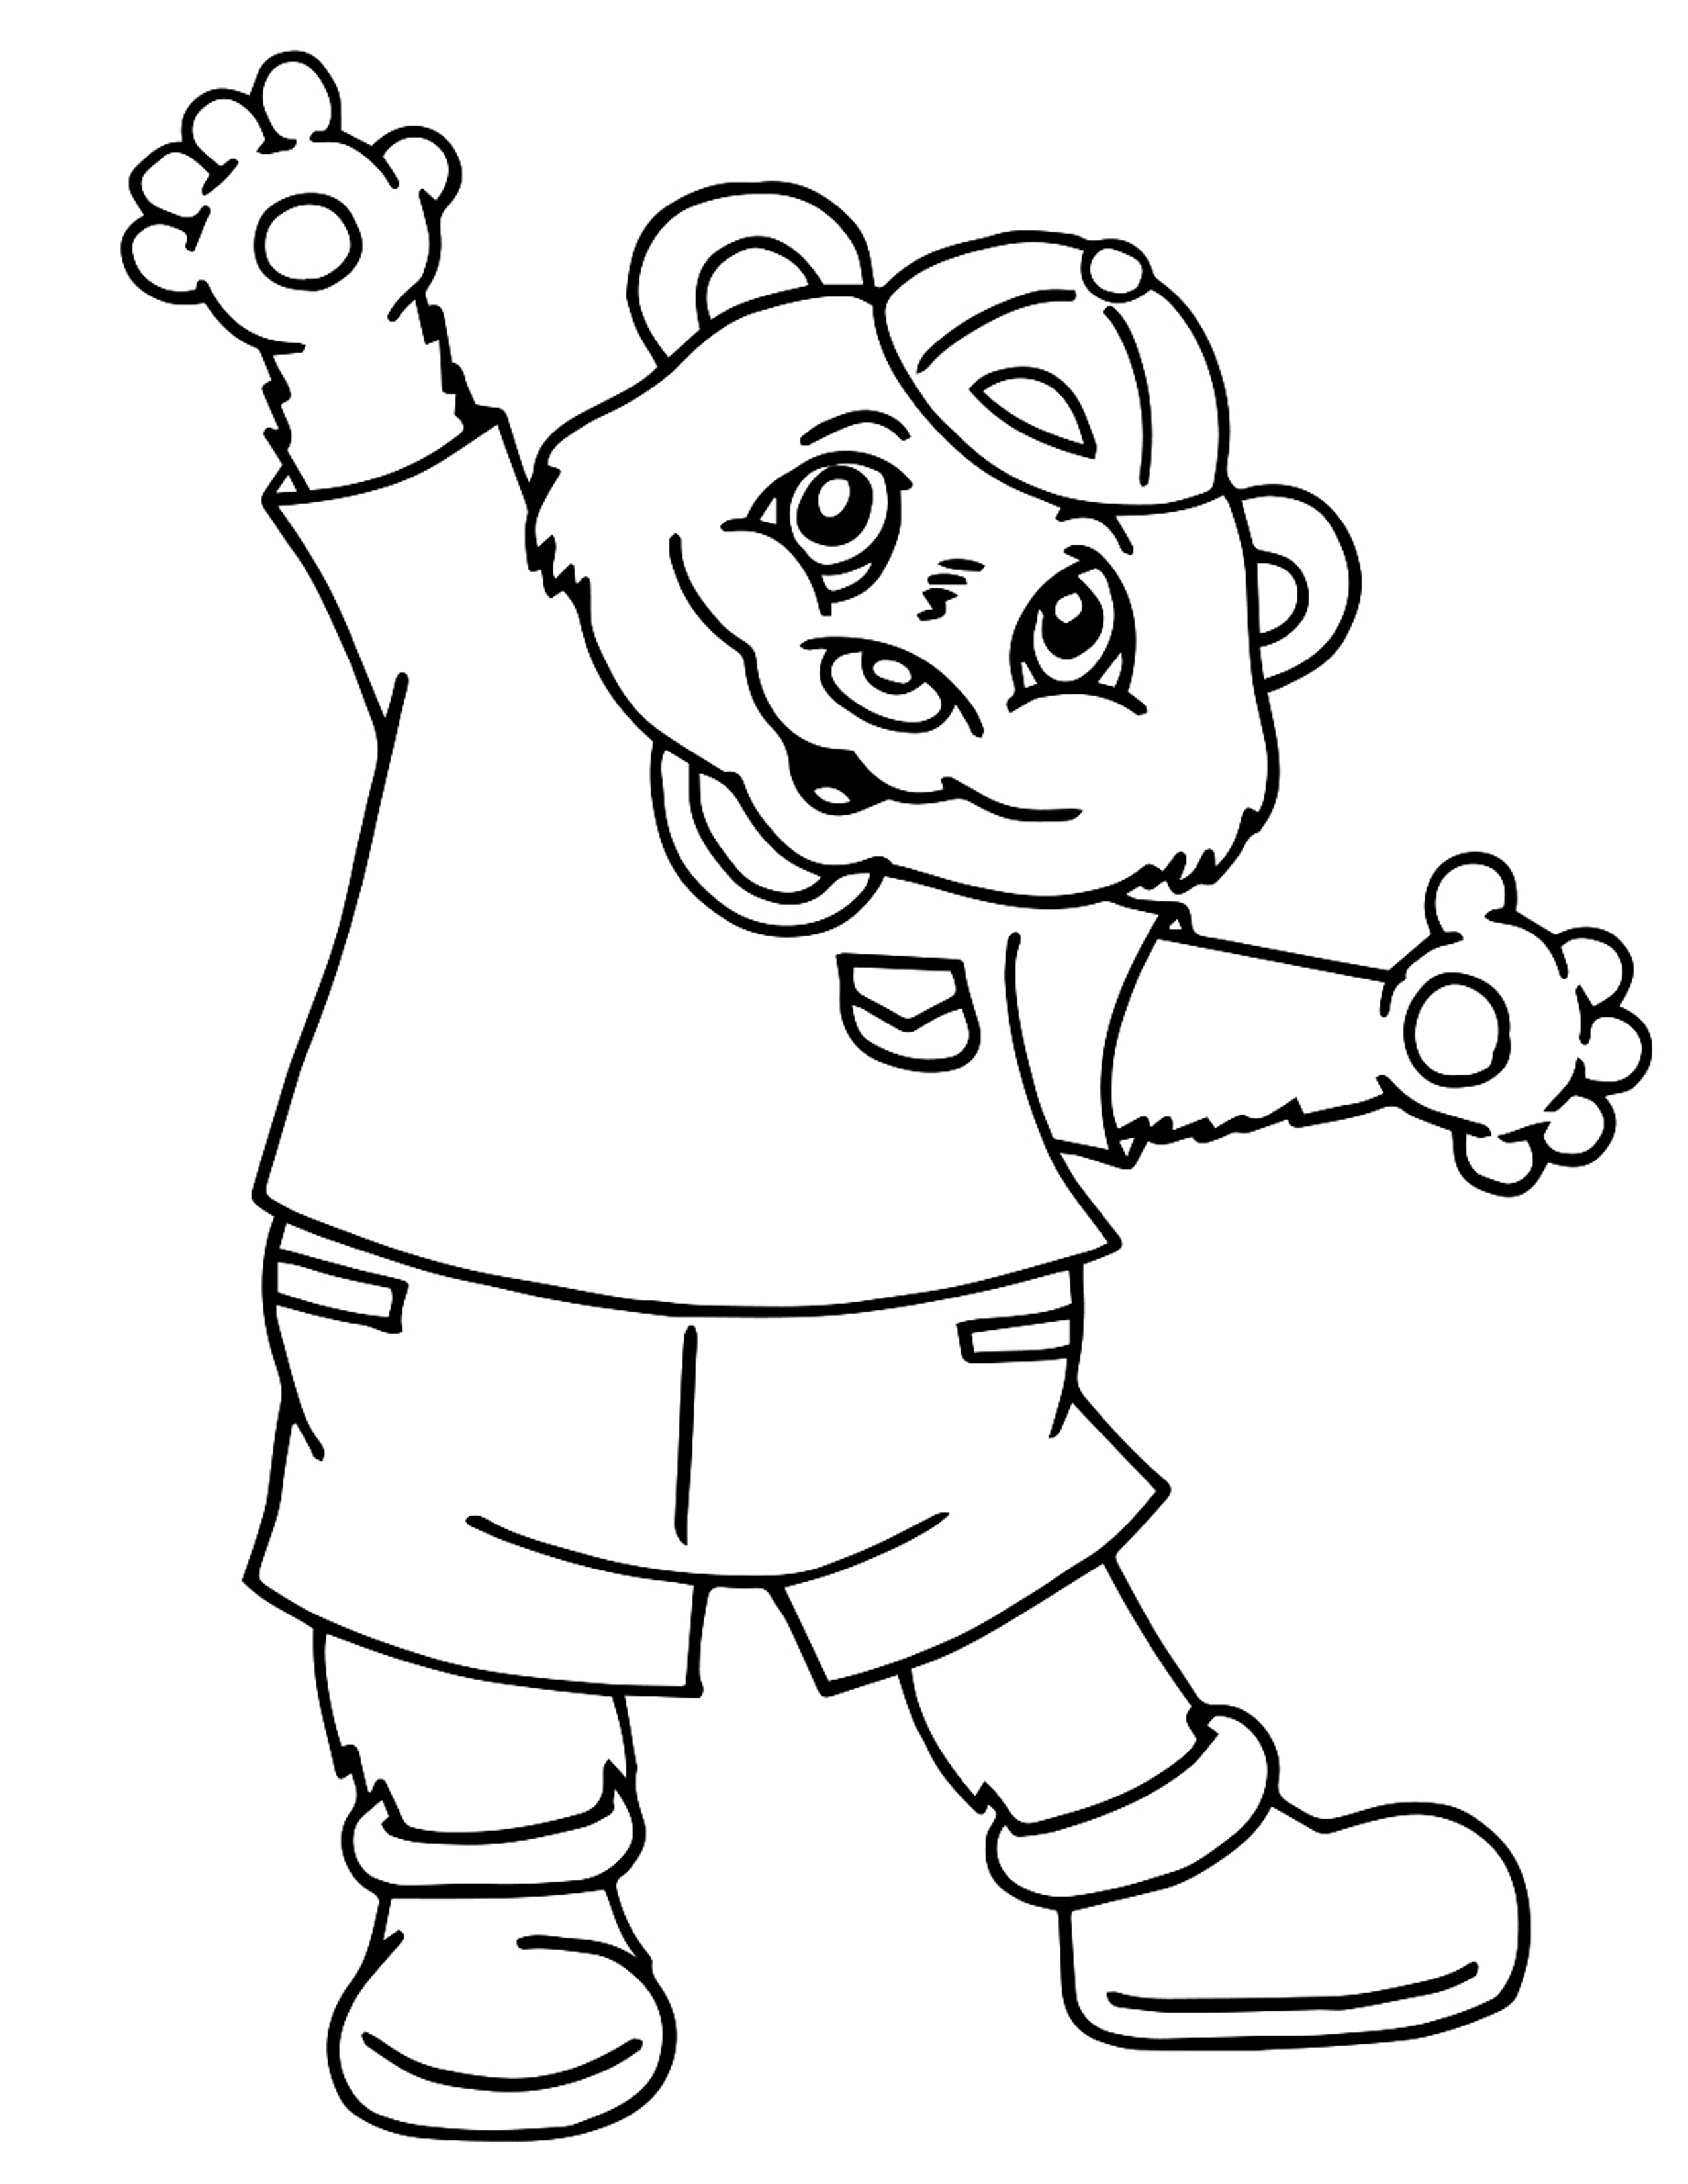 488 Cute Printable Hip Hop Coloring Pages for Kids